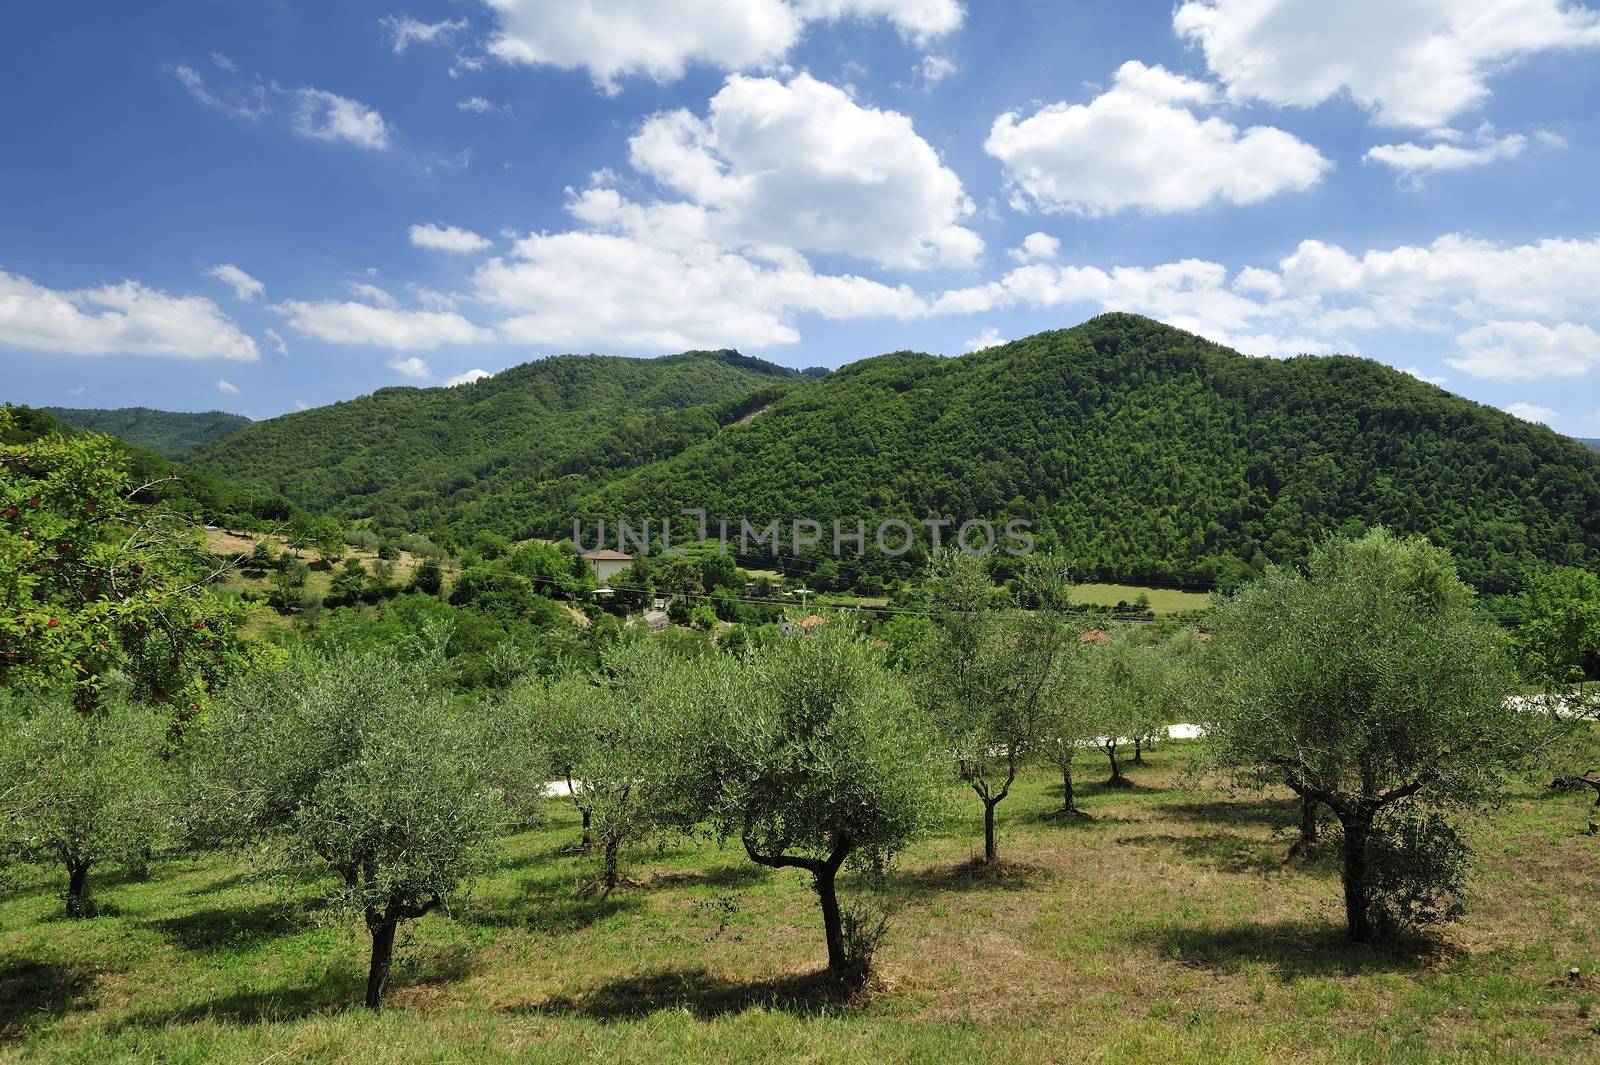 Vernio region hills in Italy by a40757